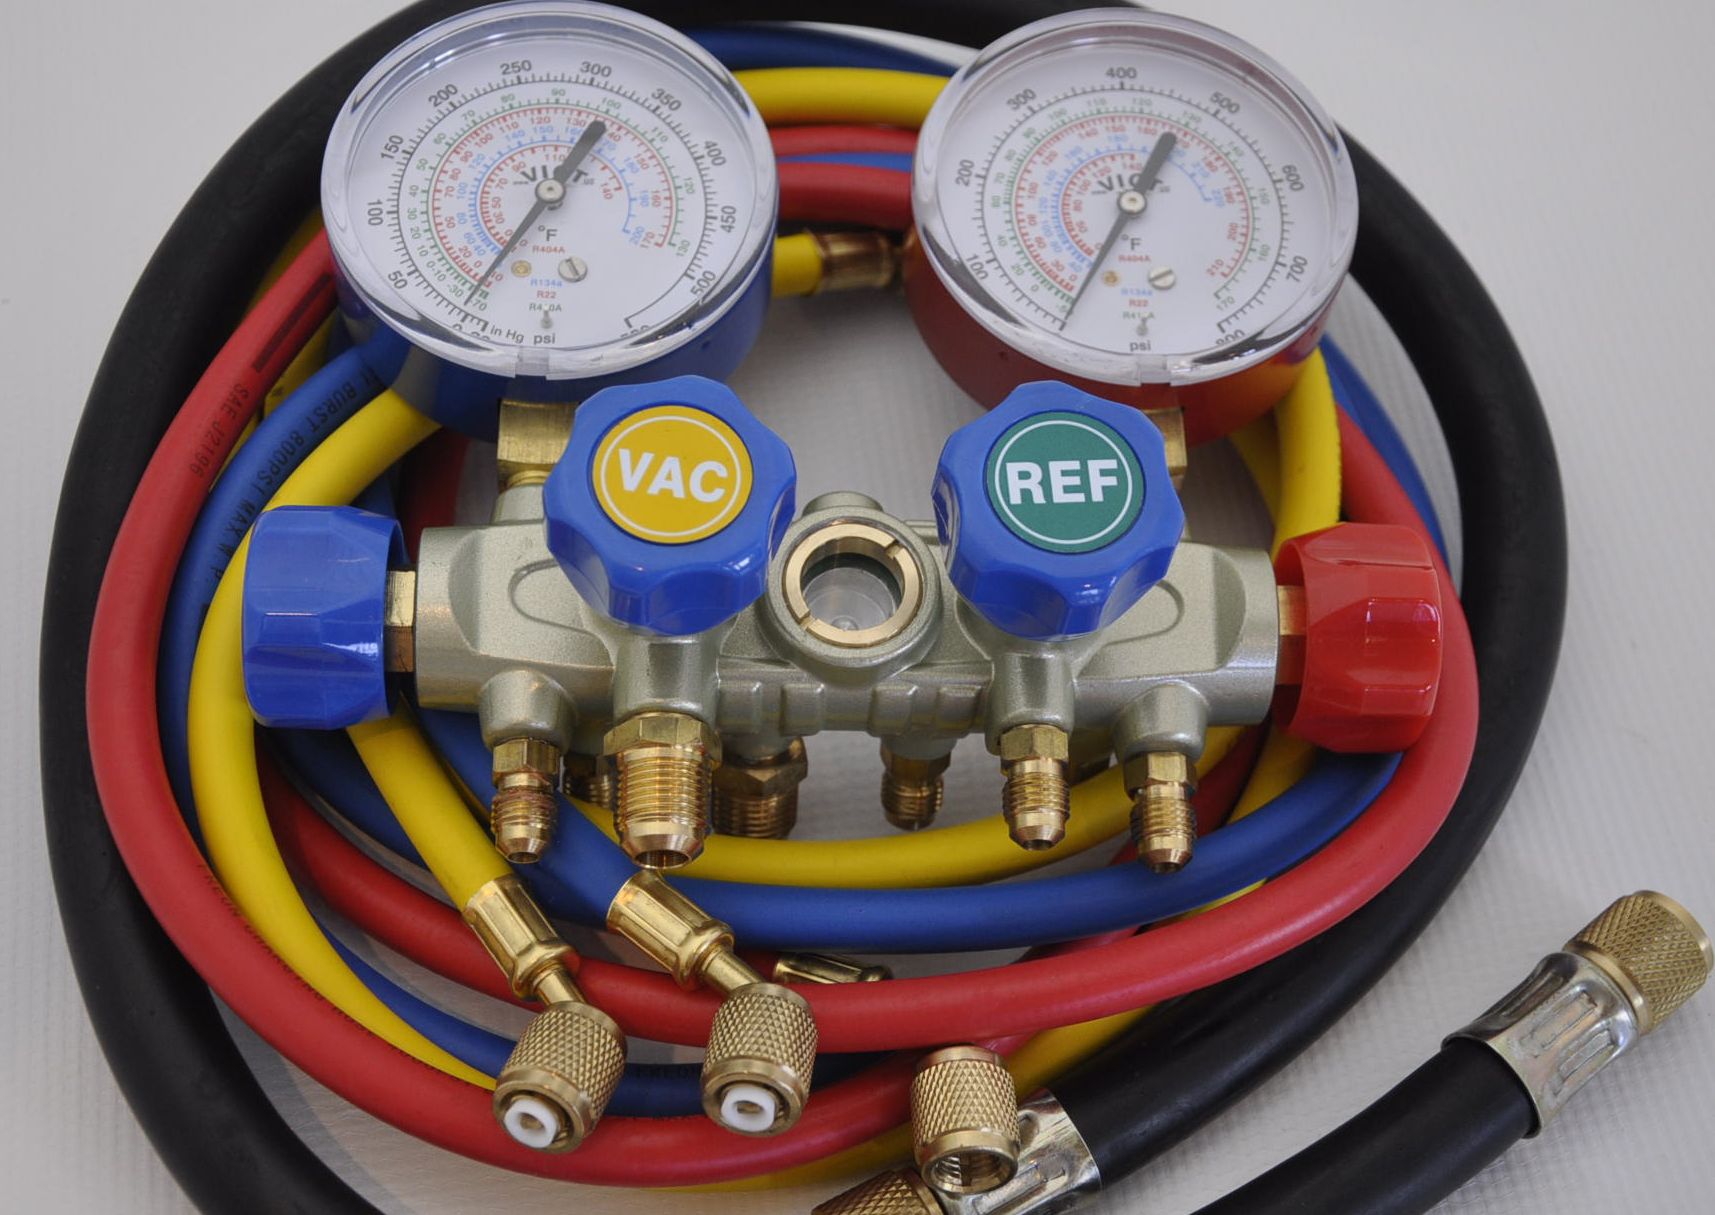 R410a Manifold Gauge Set with 5ft High Pressure Hose Set Aluminum Alloy Block Frame for R410a R22 R134a and R404a,One Tool Does It All Professional Charging Diagnosis Recovery Services Kit 